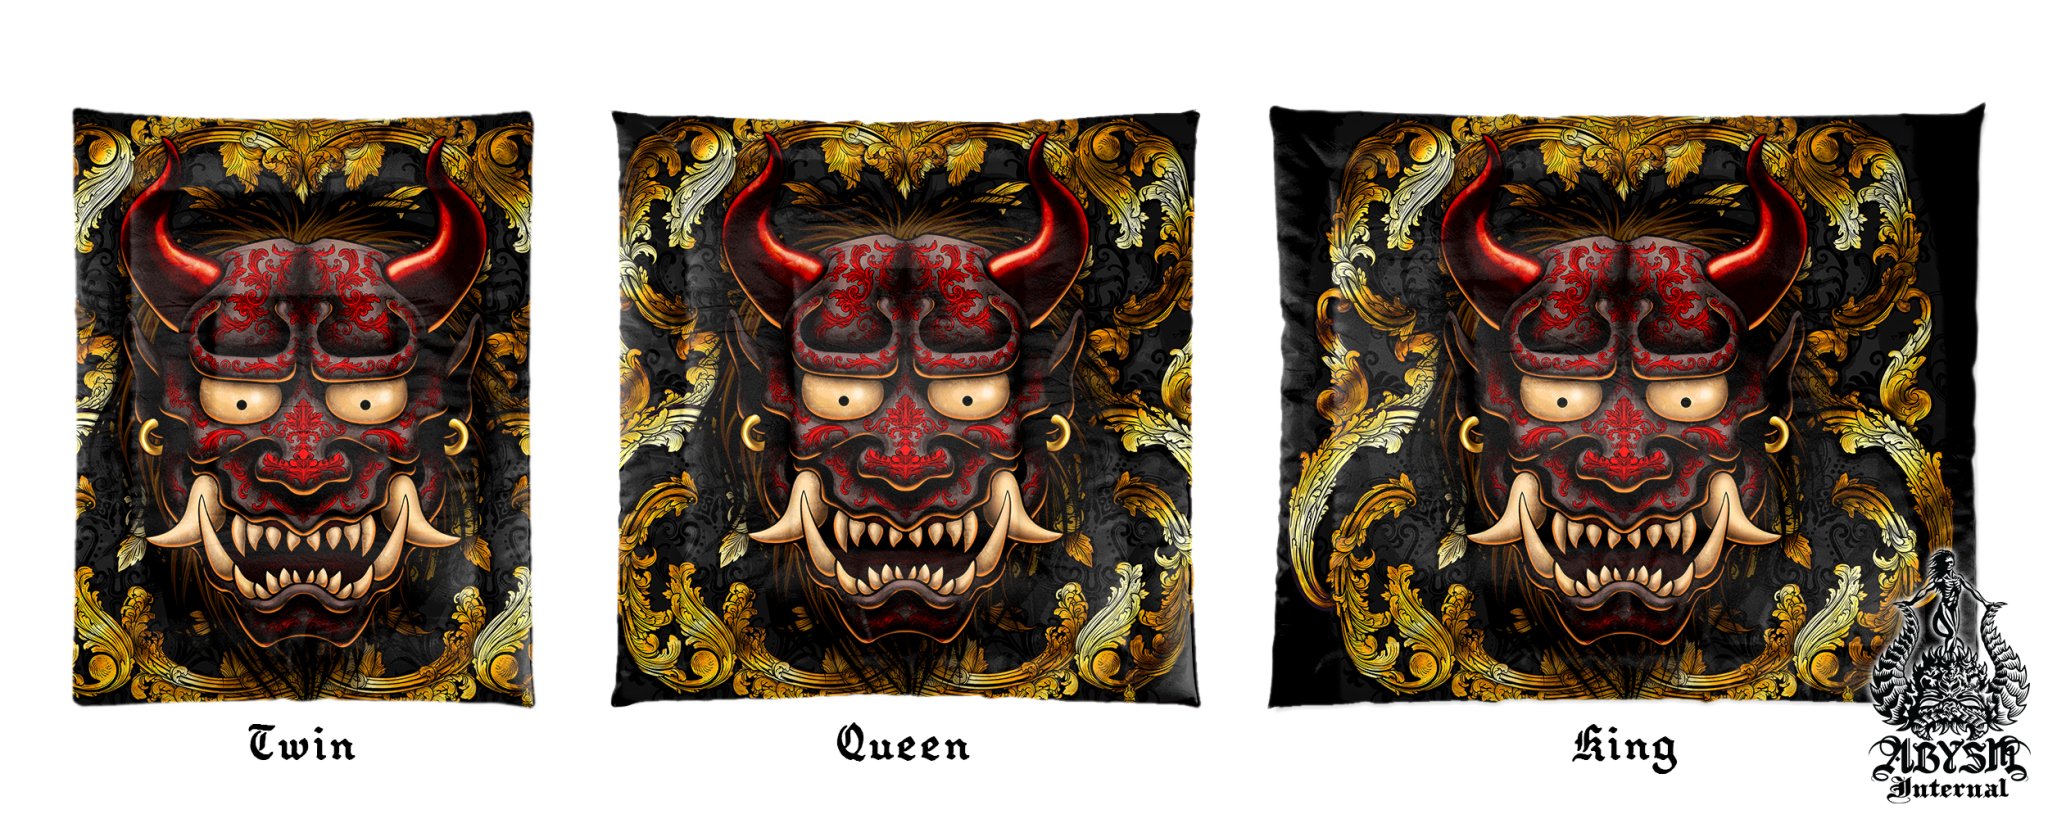 Oni Bedding Set, Comforter or Duvet, Anime Bed Cover, Bedroom Decor, King, Queen & Twin Size - Gold and Red, Japanese Demon, 2 Colors - Abysm Internal